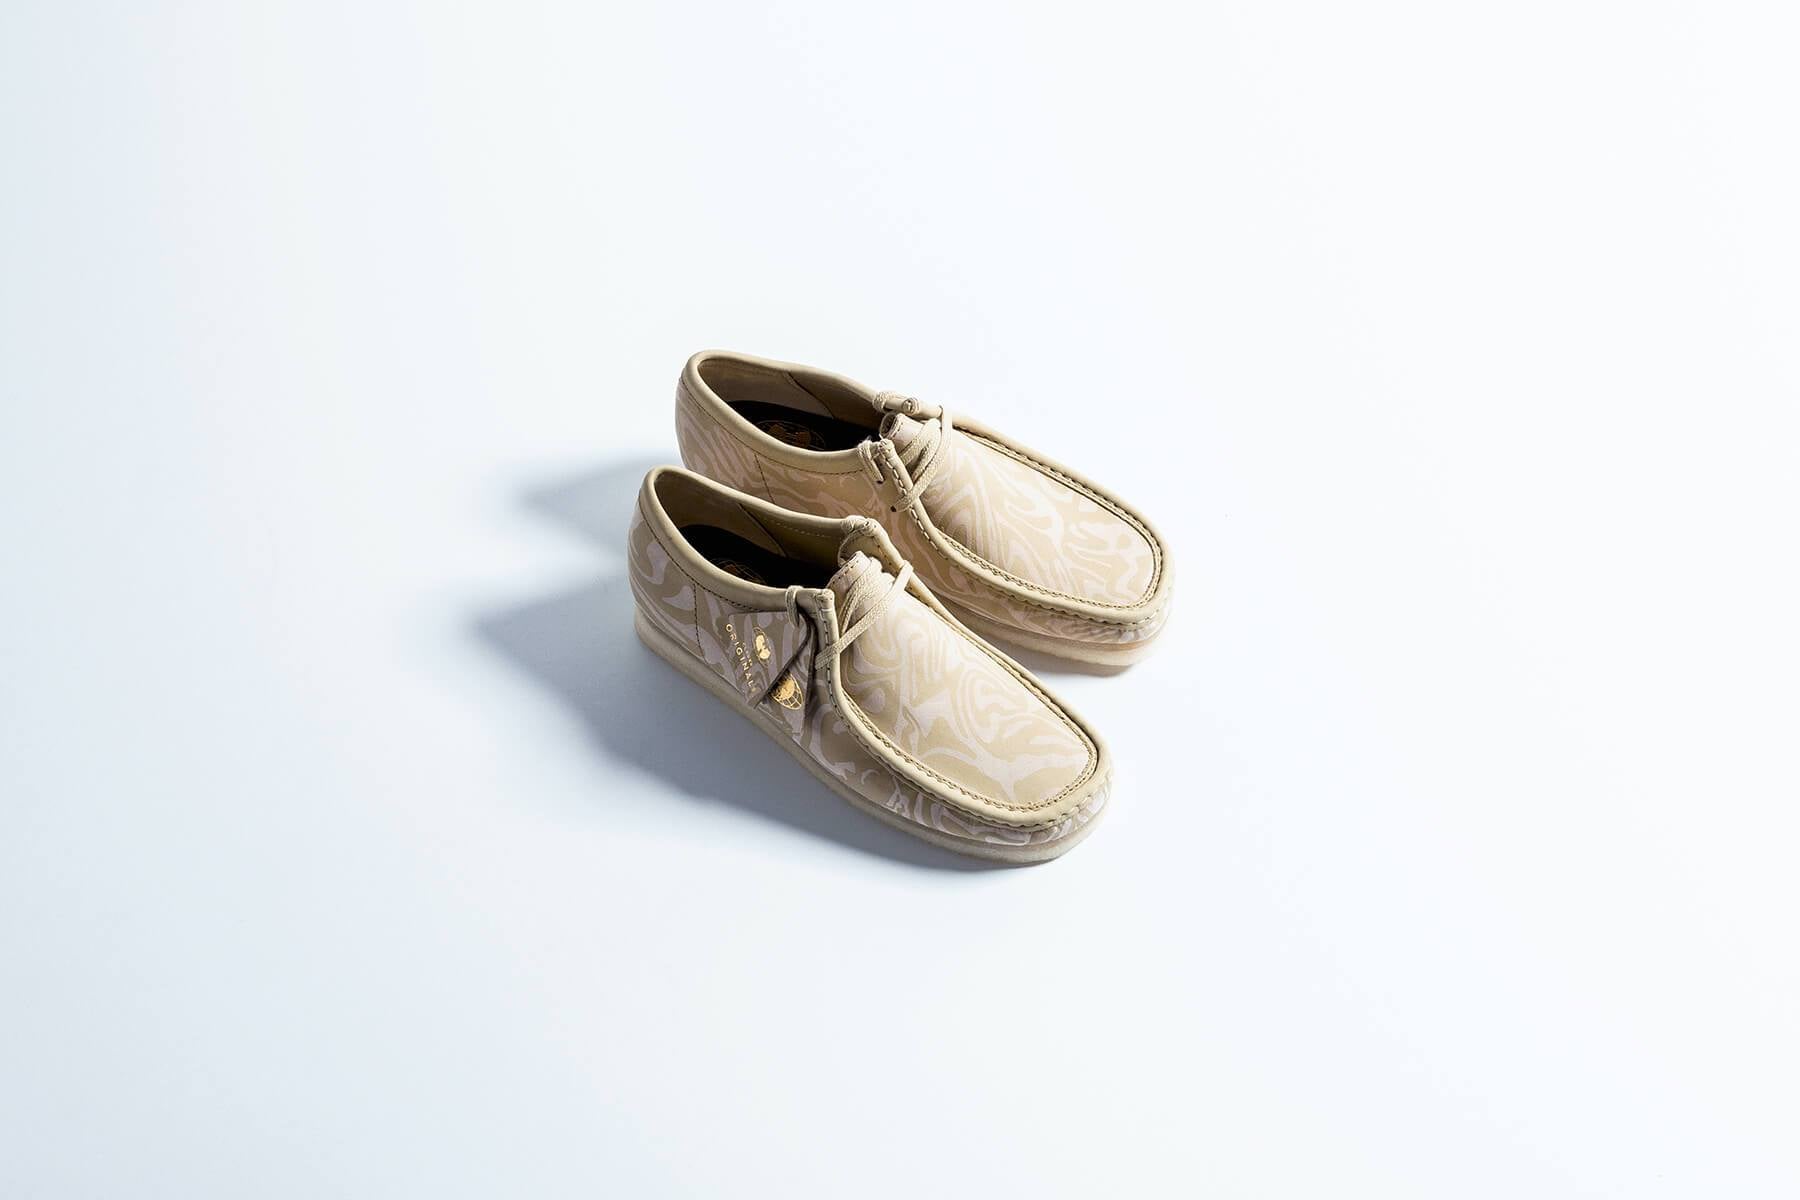 Clarks x Wu Tang Clan Wallabee Maple, Where To Buy, 26147058